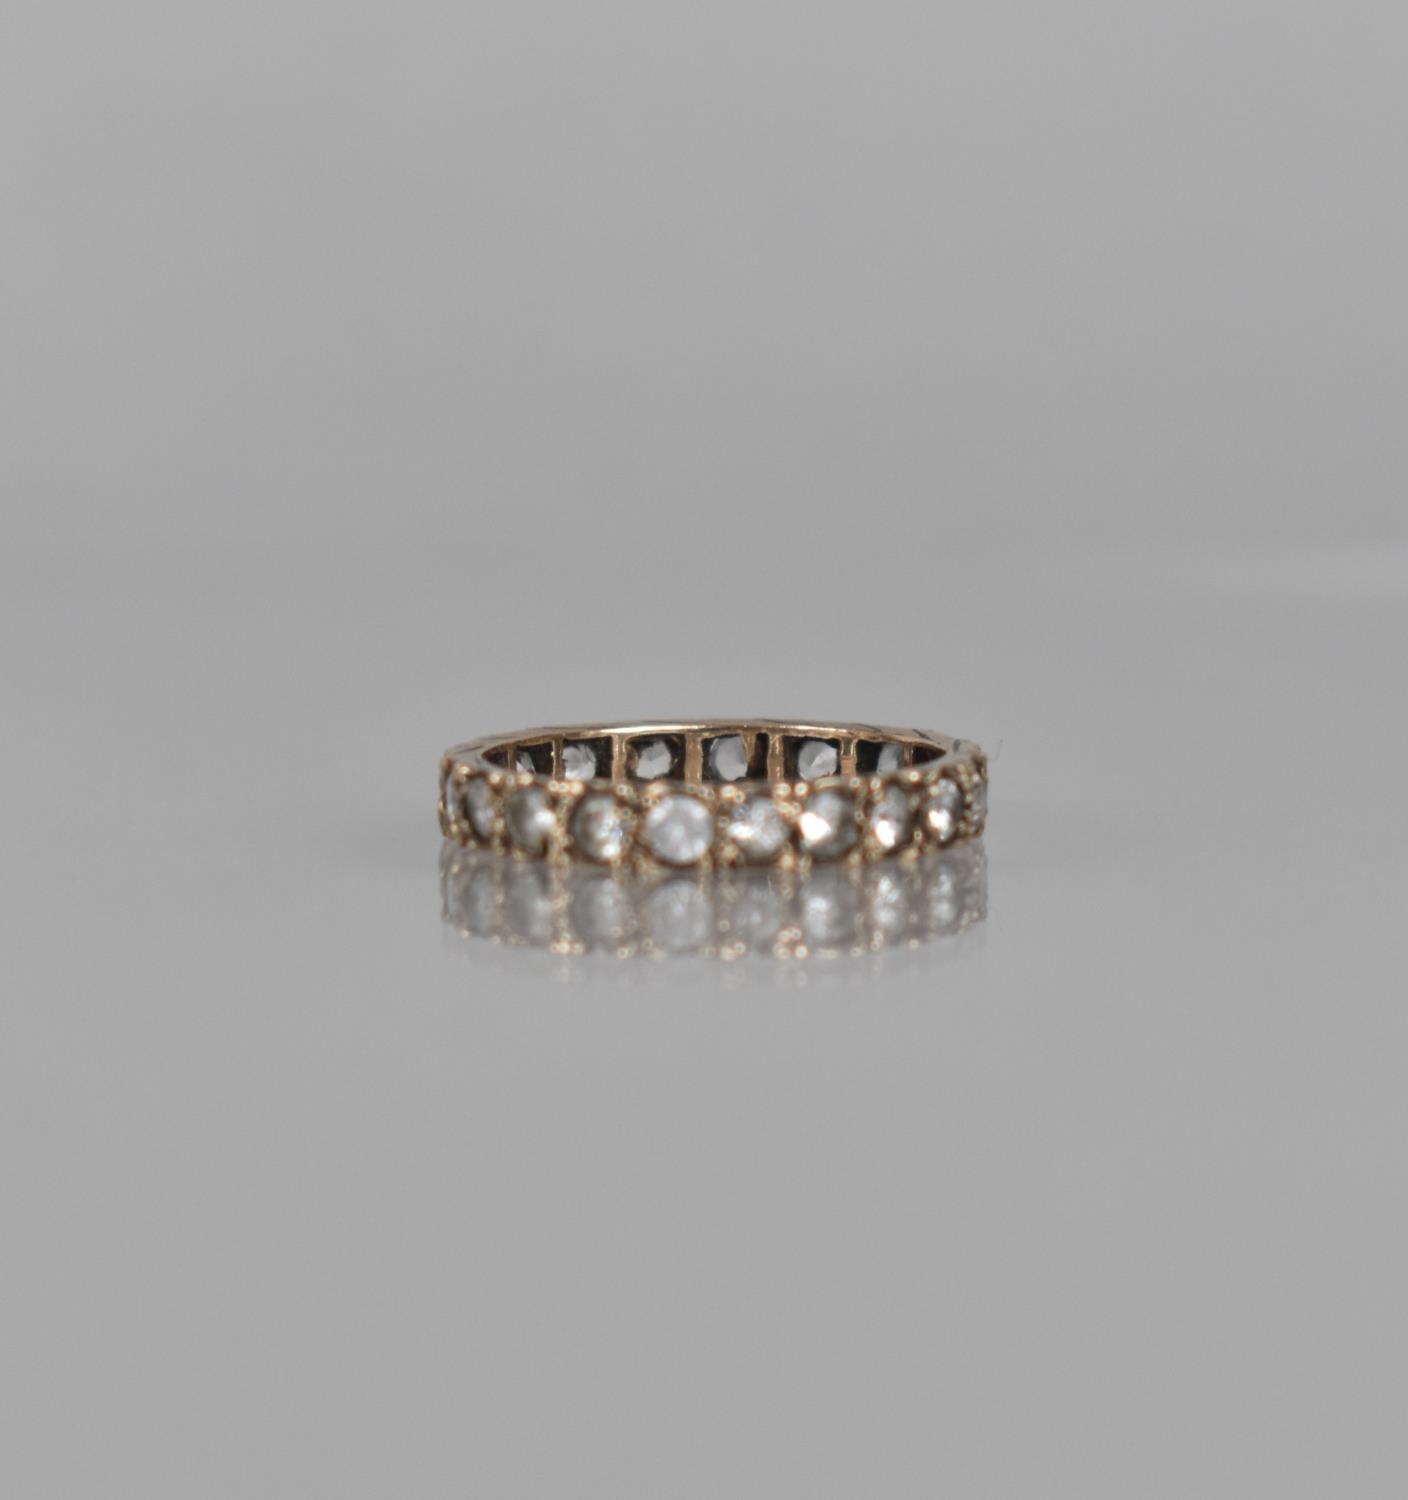 A 9ct Gold and White Sapphire Edwardian Eternity Ring Each Old Cut Stone Approx 2mm Diameter, Size